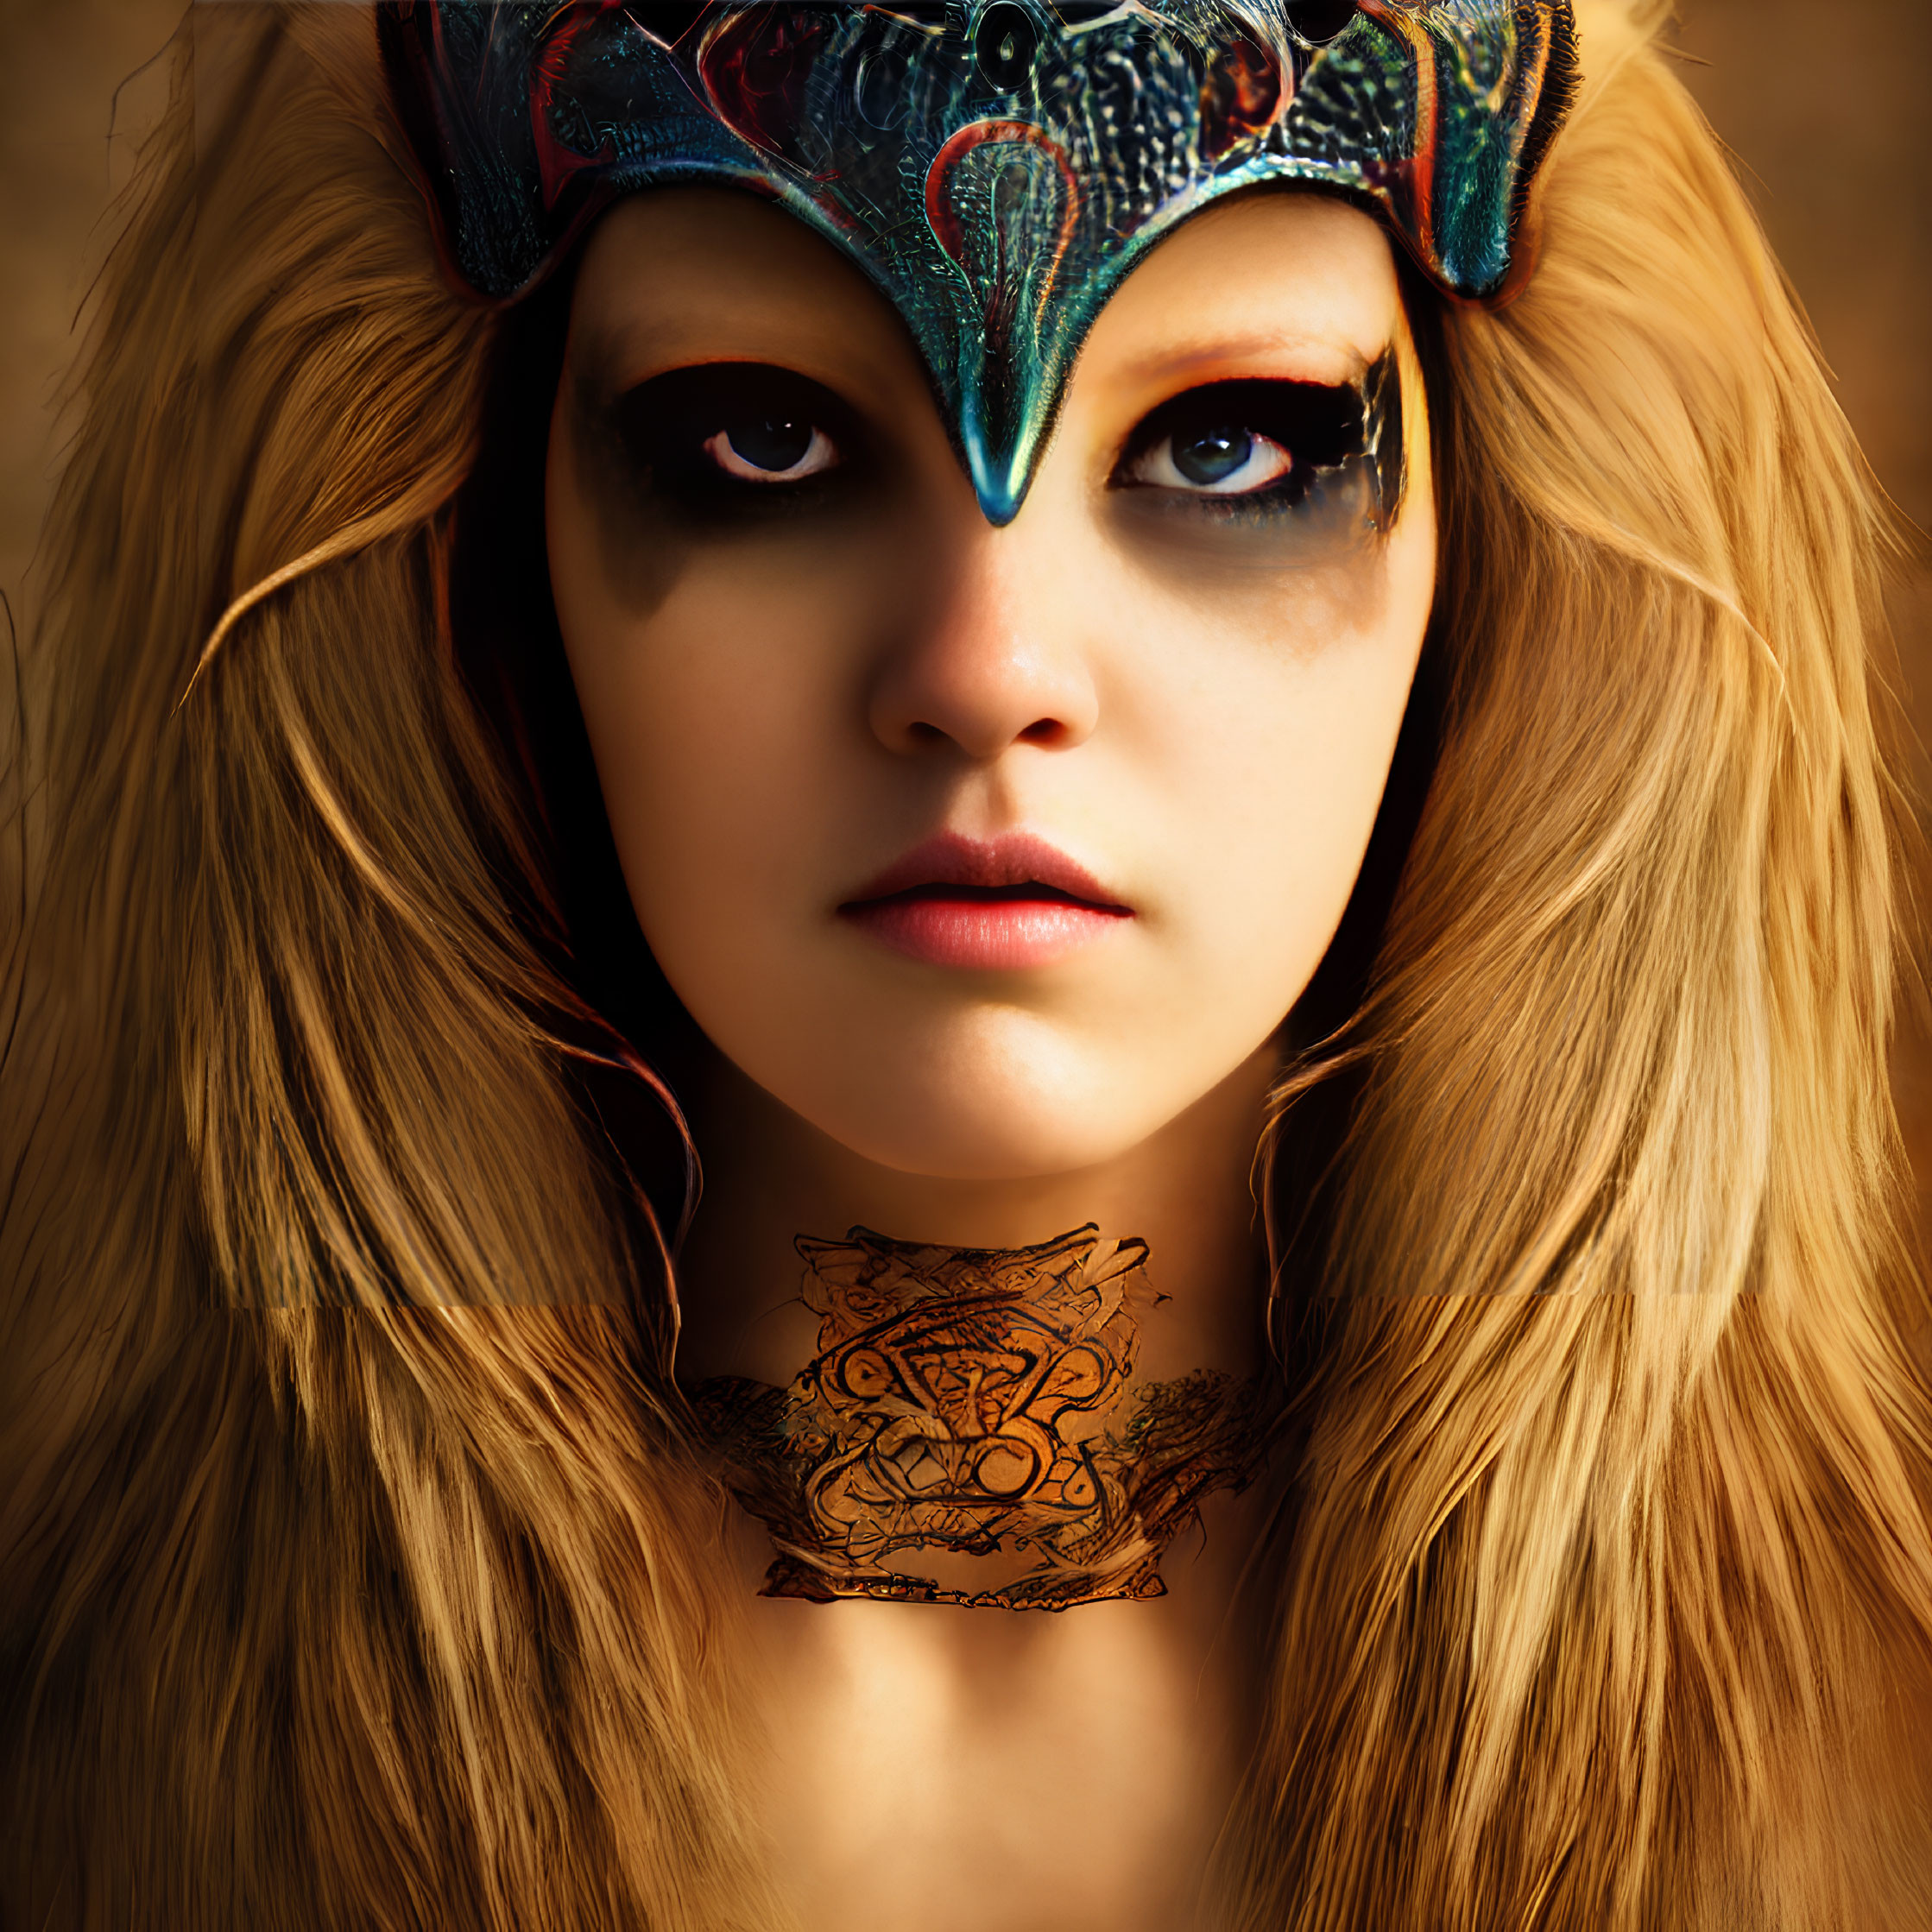 Intense gaze person with detailed mask, tribal neck tattoo, and mane-like hair on warm backdrop